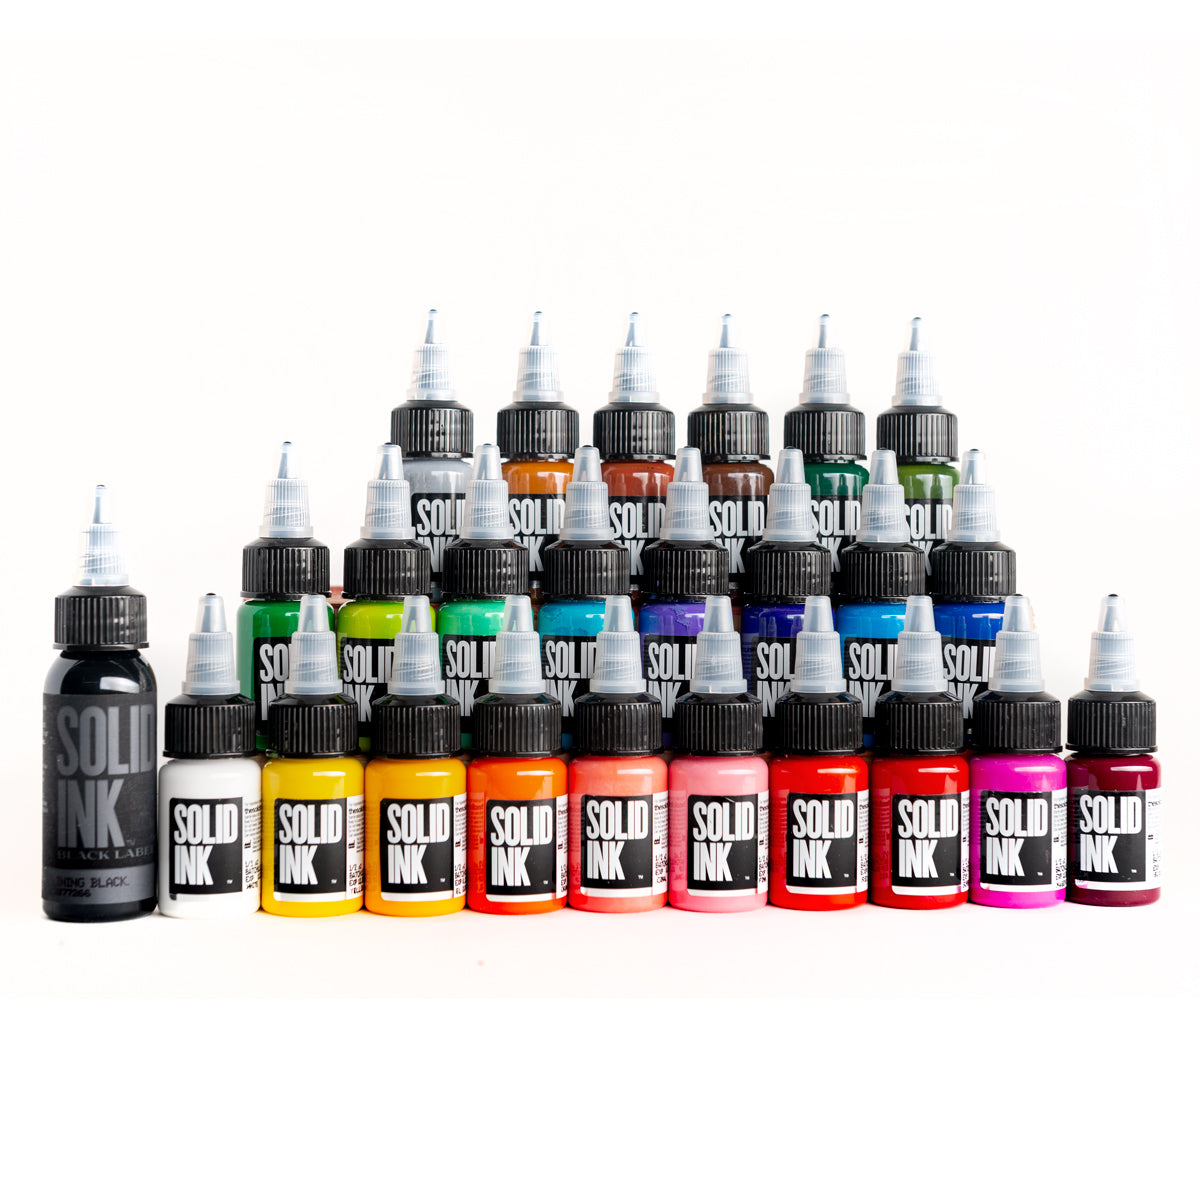 Solid Ink 25 Half Ounce Color Tattoo Ink Set